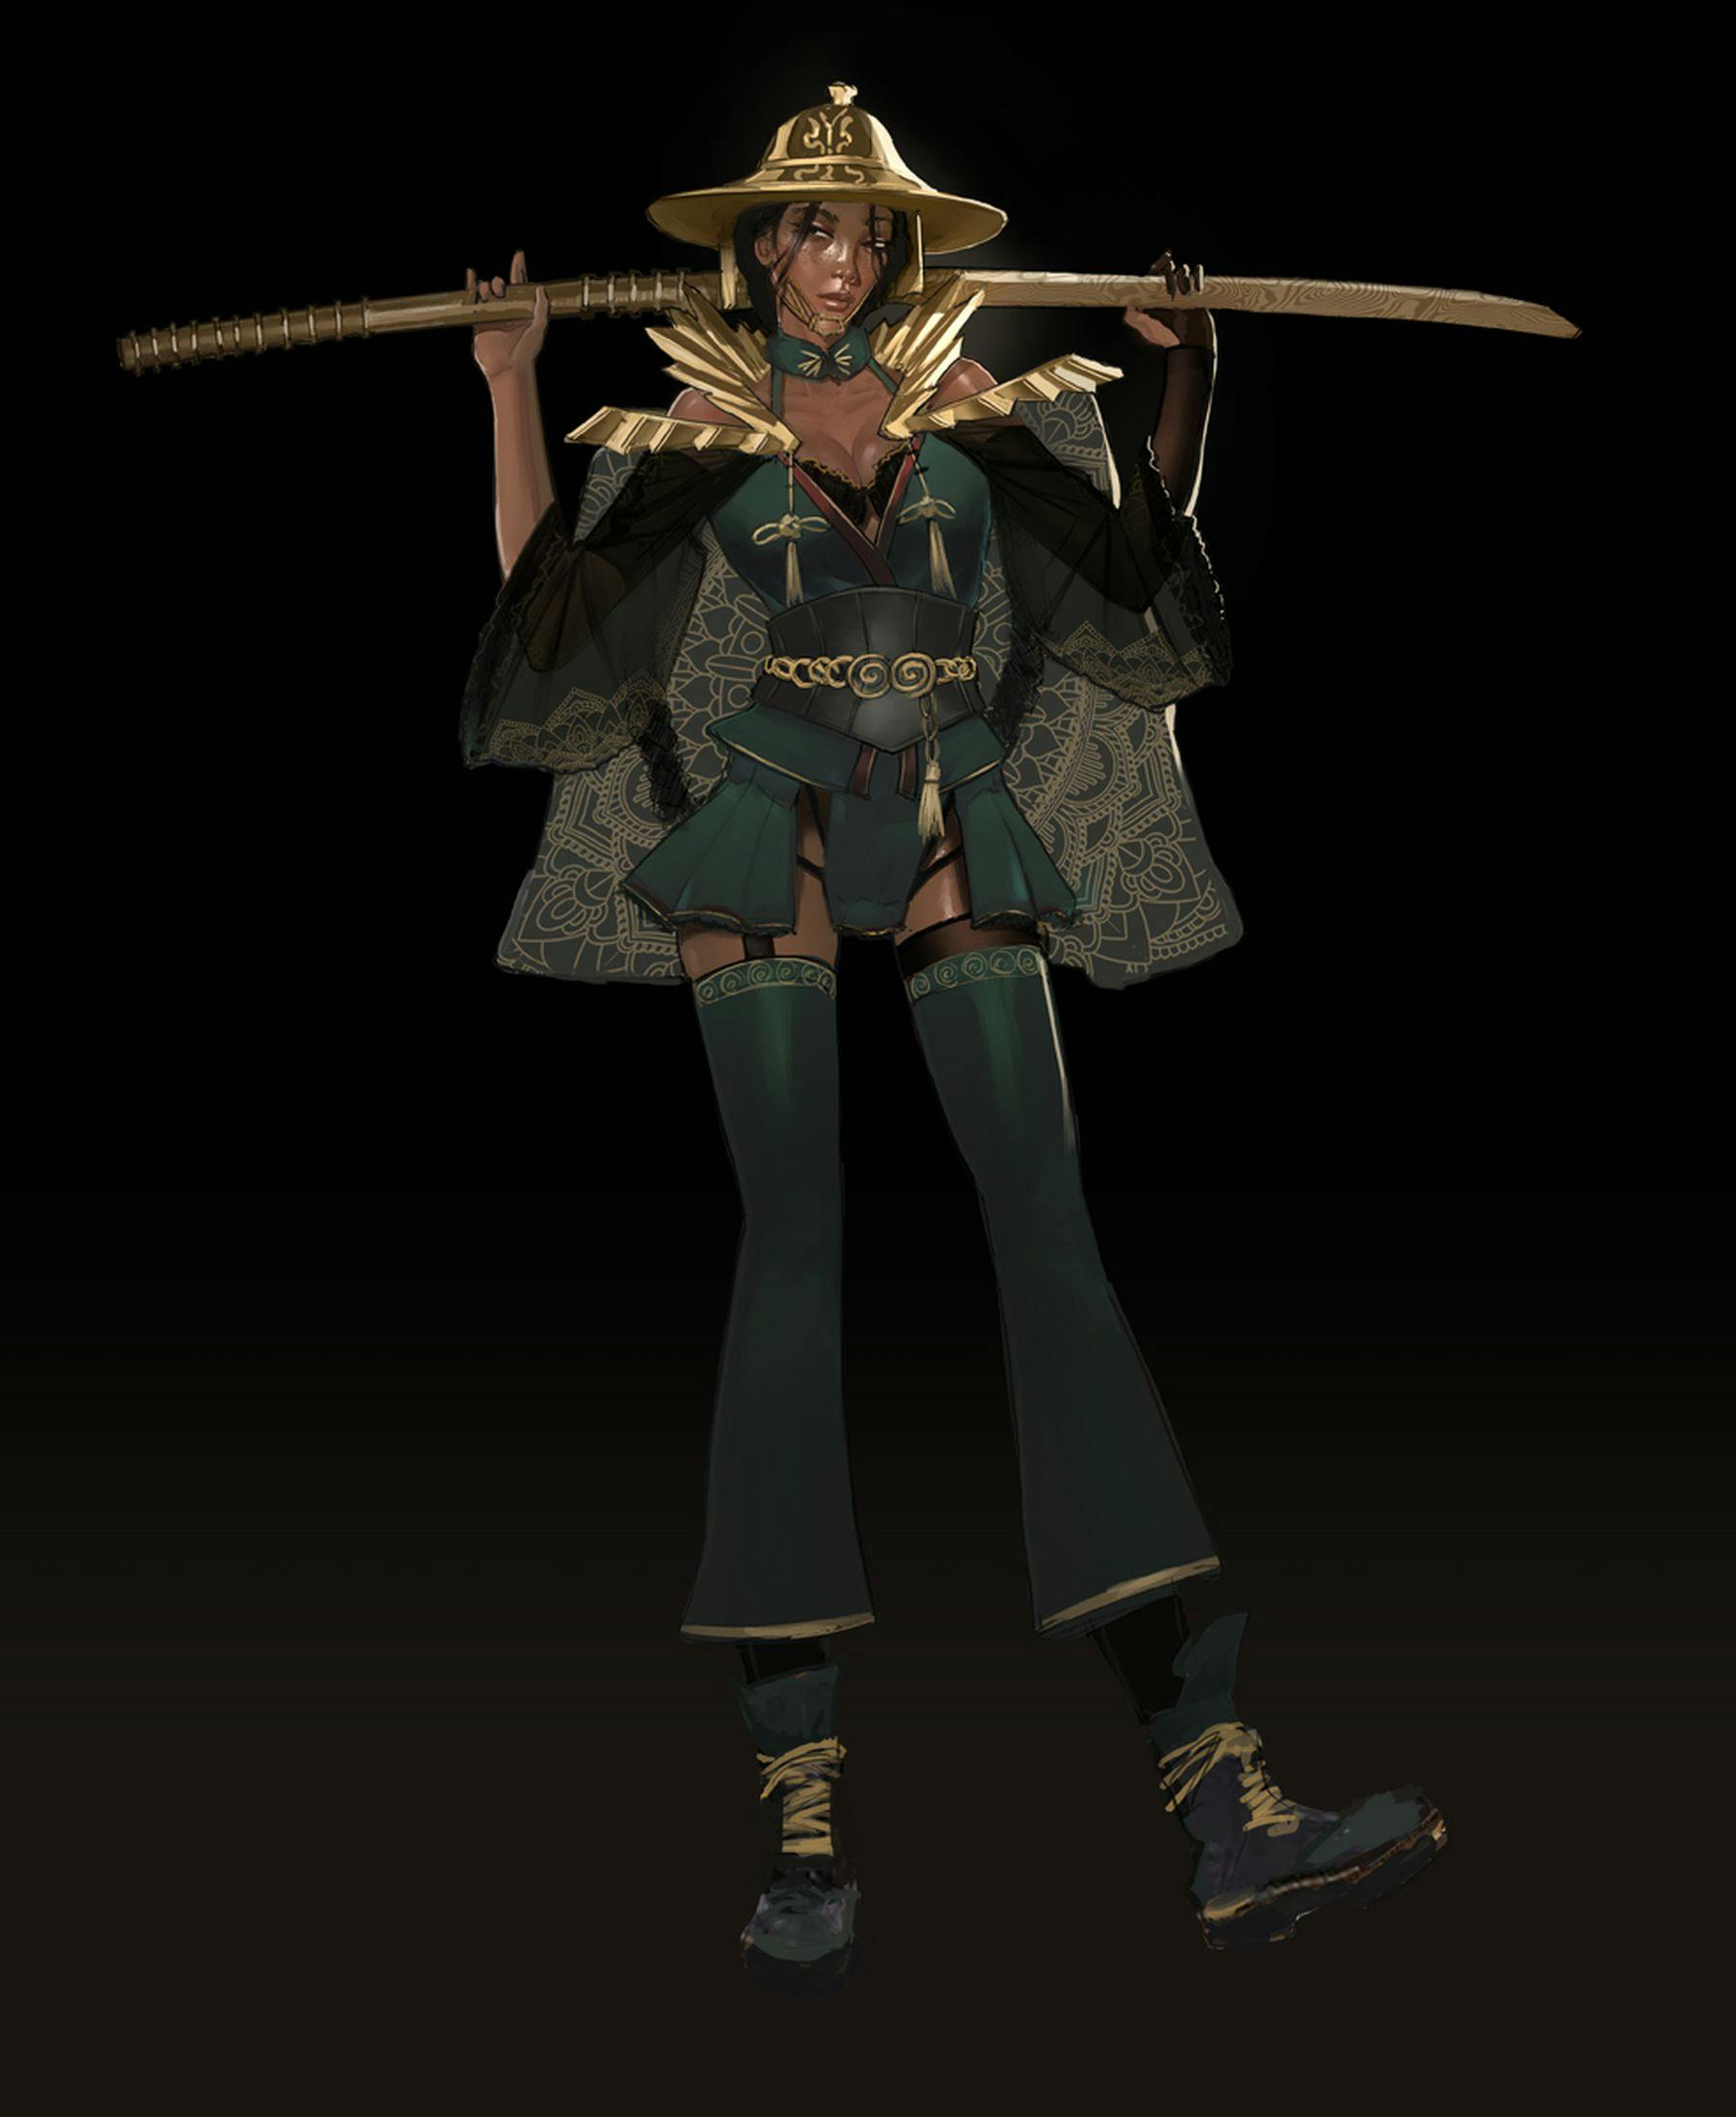 A dark illustration against a black background of a person wearing a gold hat and a green outfit with gold details. The trousers are attached like suspenders. They are wearing a cape large gold collar and hold a long sword across both shoulders.